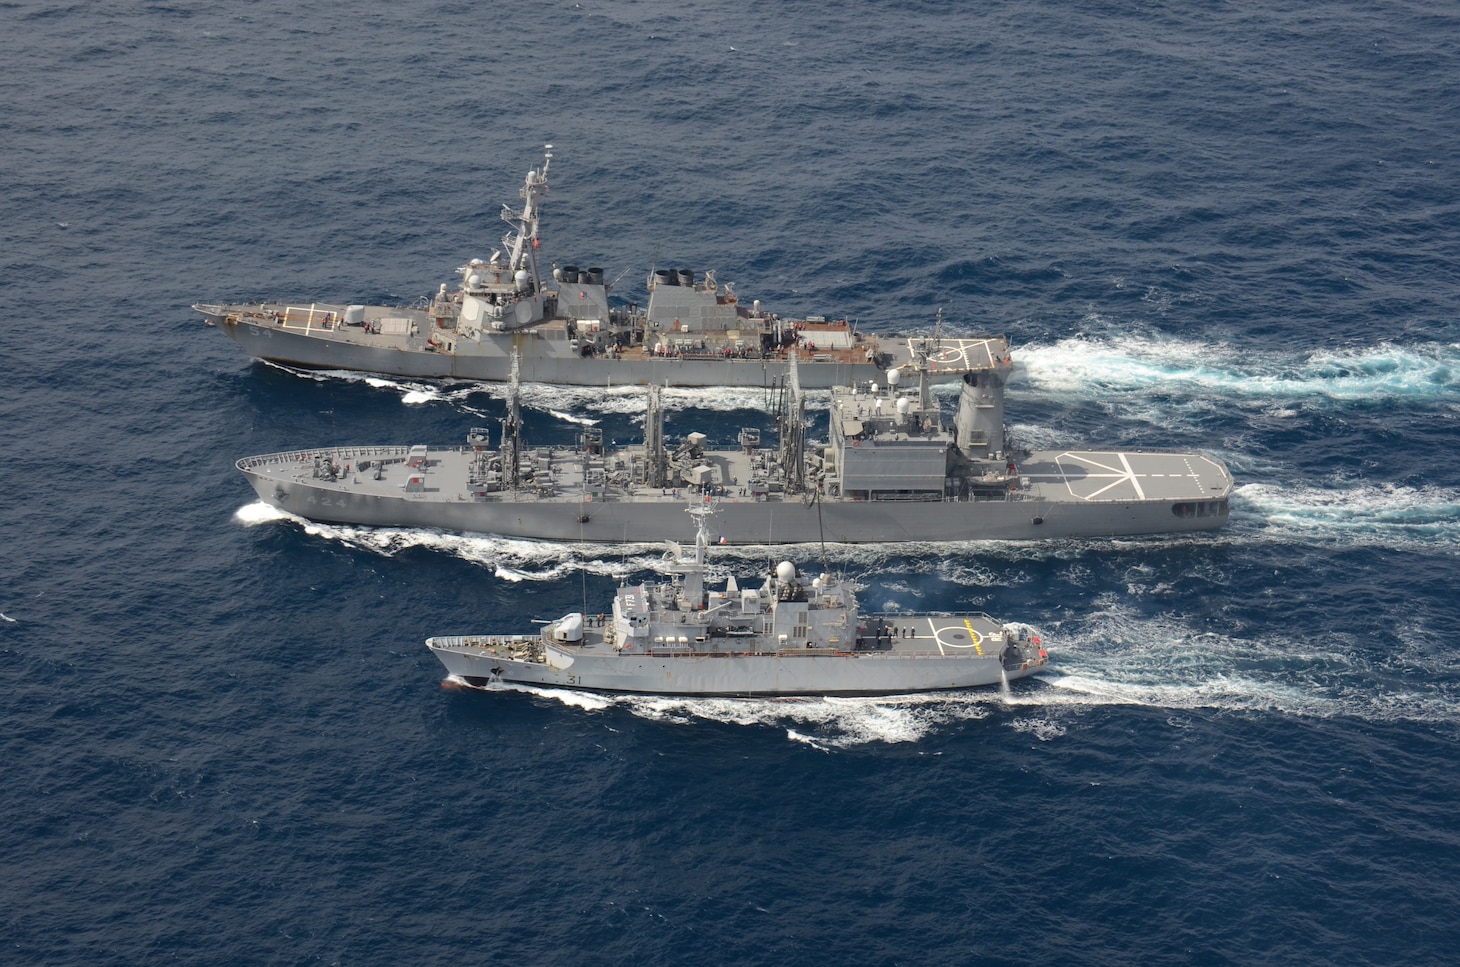 The Arleigh Burke-class guided-missile destroyer USS Curtis Wilbur (DDG 54) conducts a replenishment-at-sea with the Japan Maritime Self-Defense Force Towada-class replenishment ship JS Hamana (AOE 424) and French Floreal-class light frigate FNS Prairial (F731).